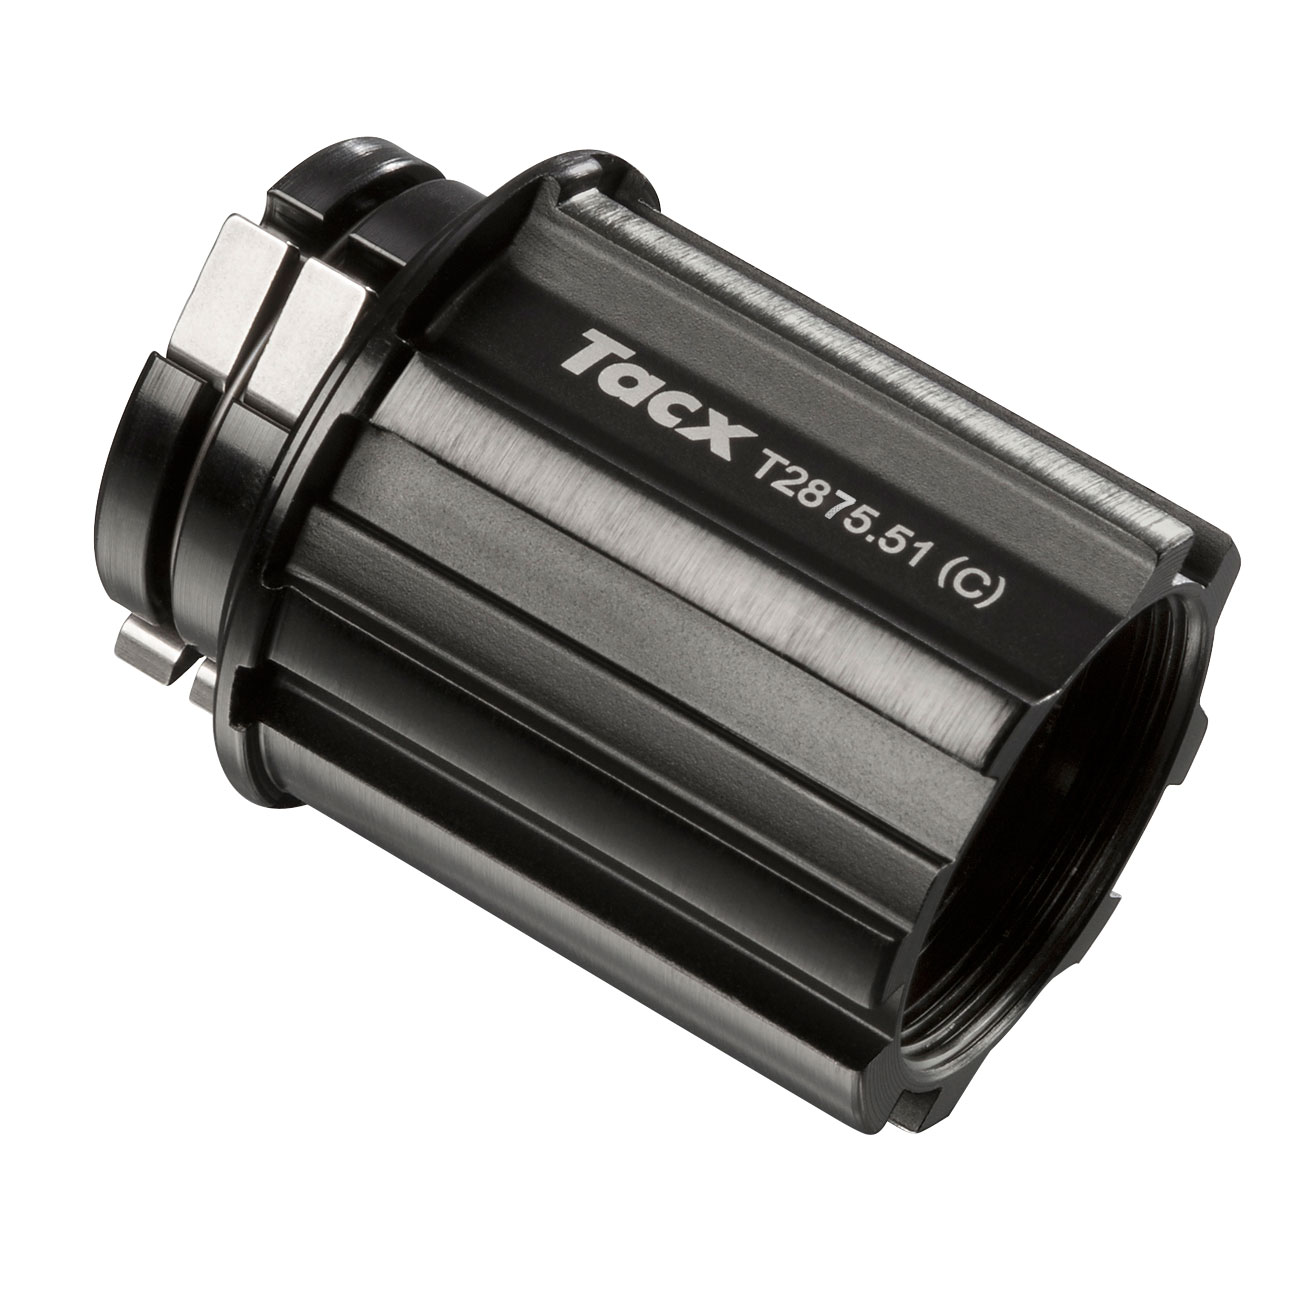 Image of Garmin Tacx T2875.51 Campagnolo Freewheel for Neo 2T, Flux 2 & S